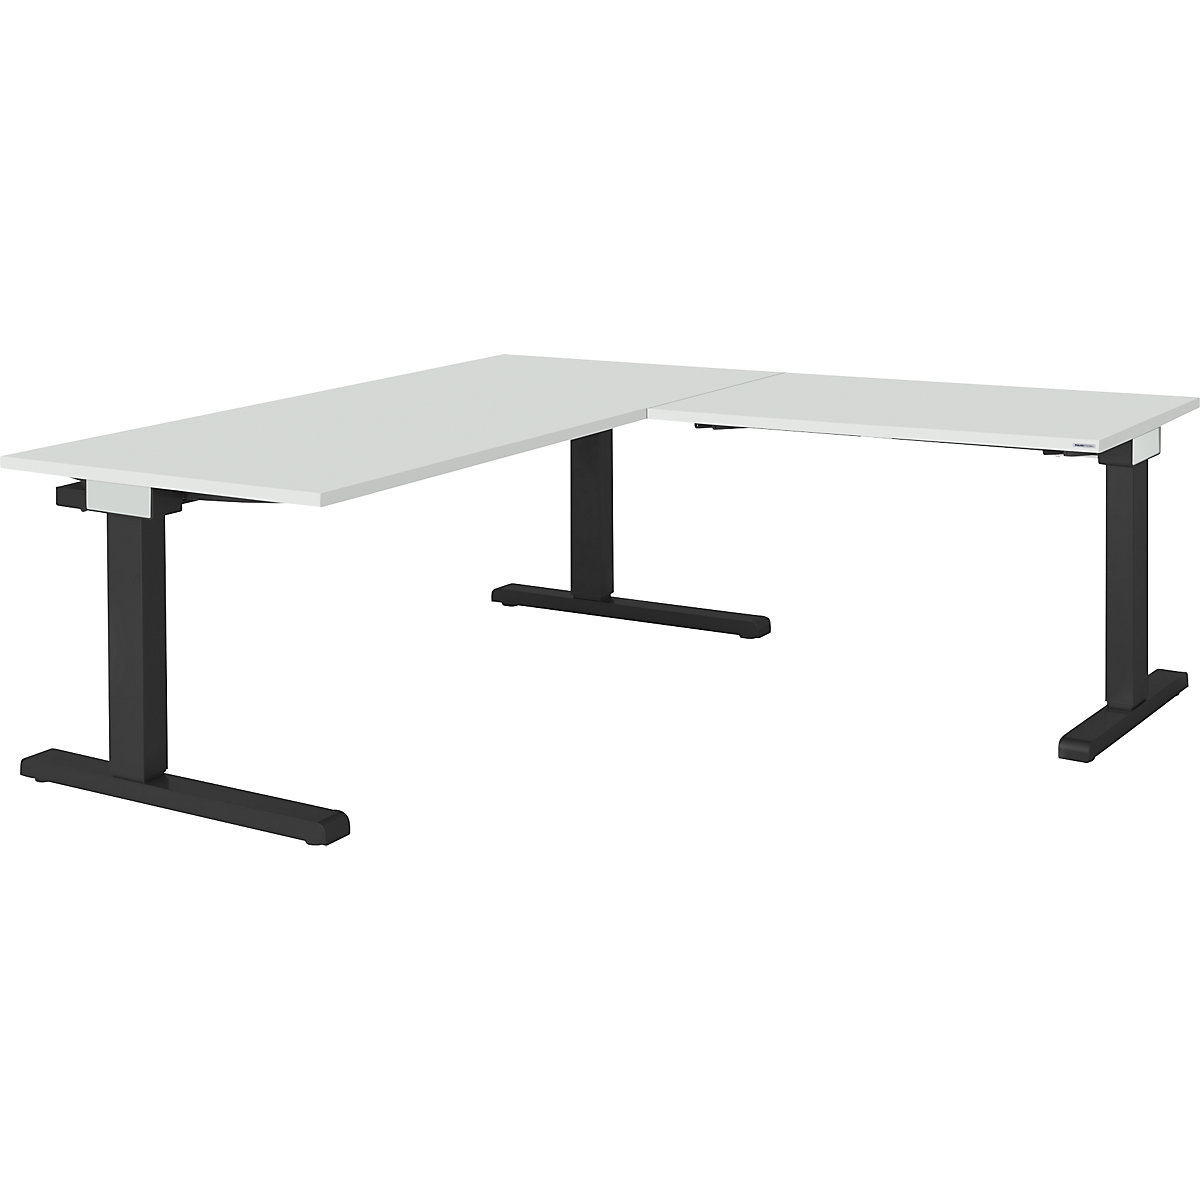 Desk, interlinked – mauser, WxD 1600 x 800 mm, angled extension on right (width 1000 mm), light grey top, charcoal frame-2